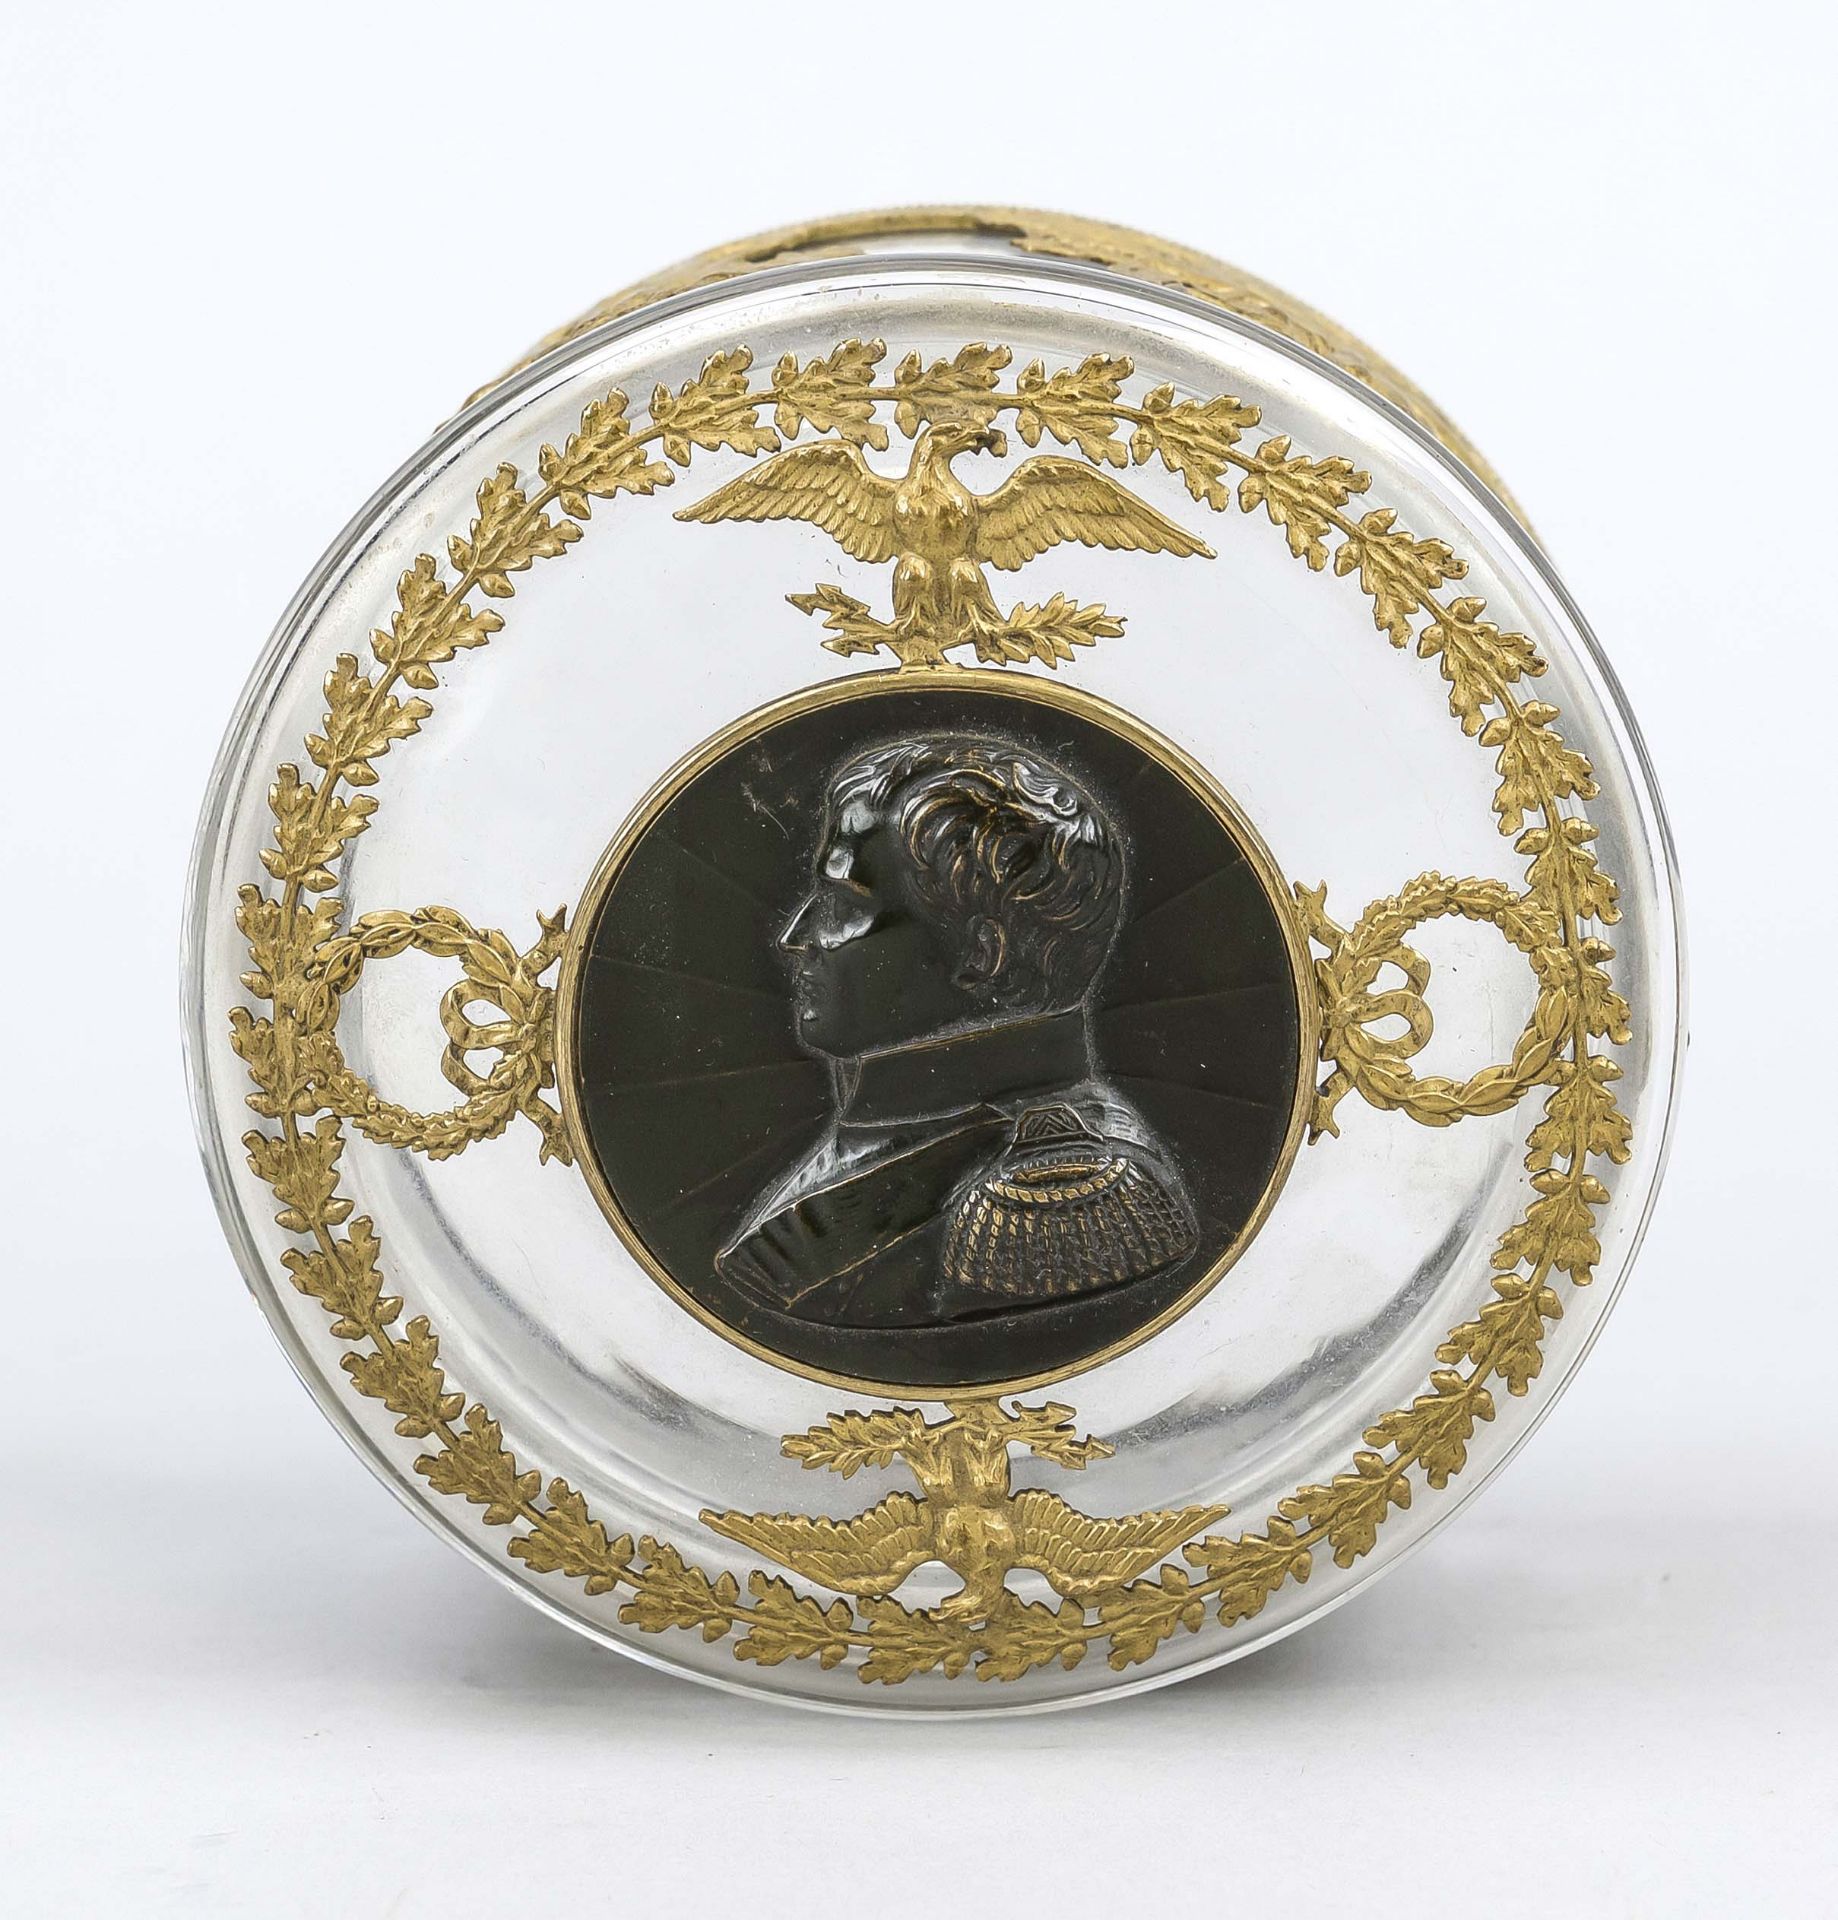 Napoleon lidded box, c. 1900, glass with brass relief, various antique-style depictions, lions - Image 2 of 2